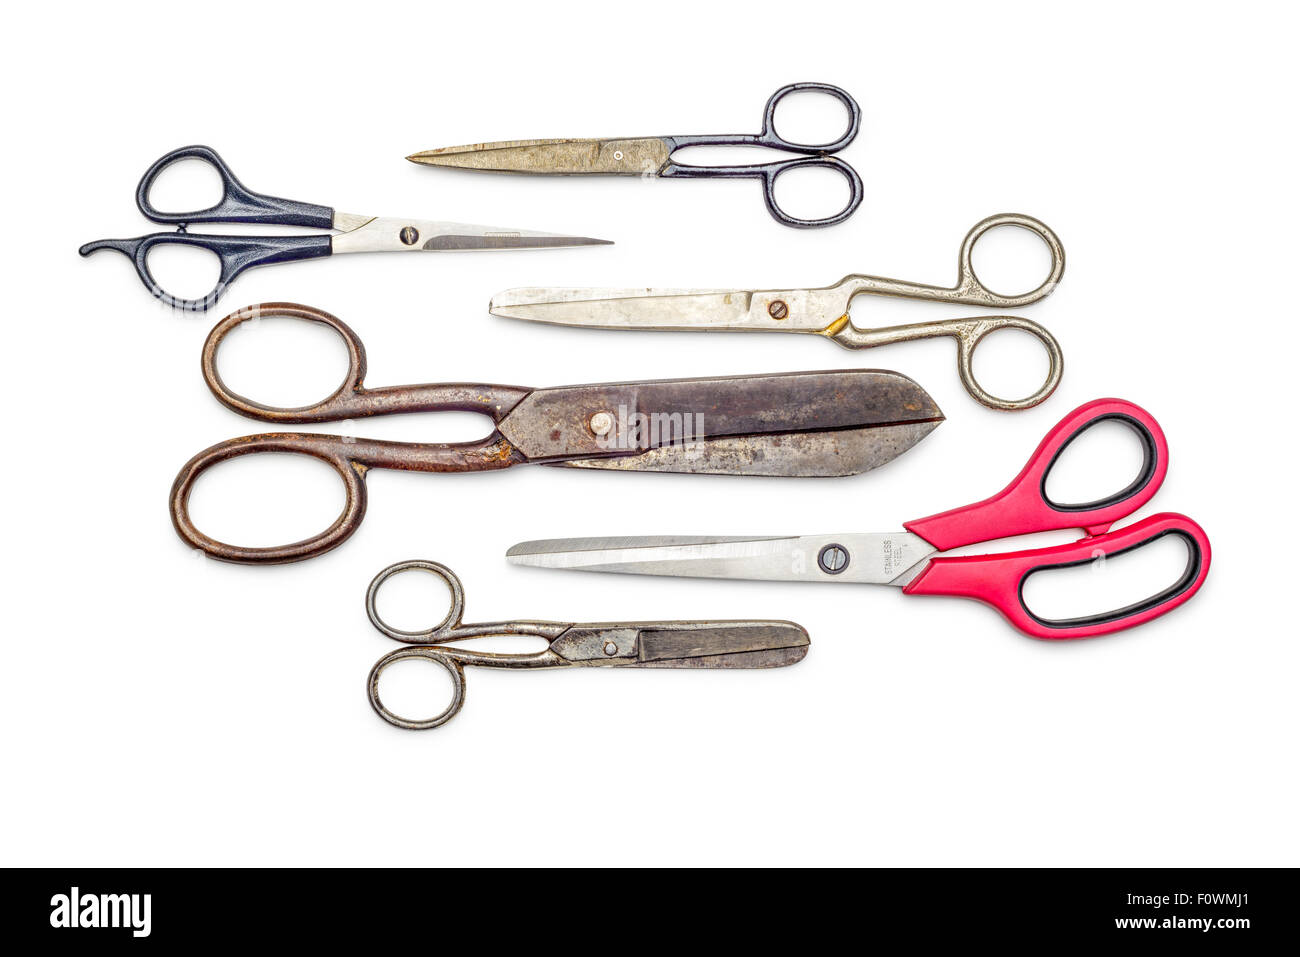 Group of various scissors isolated on white background Stock Photo